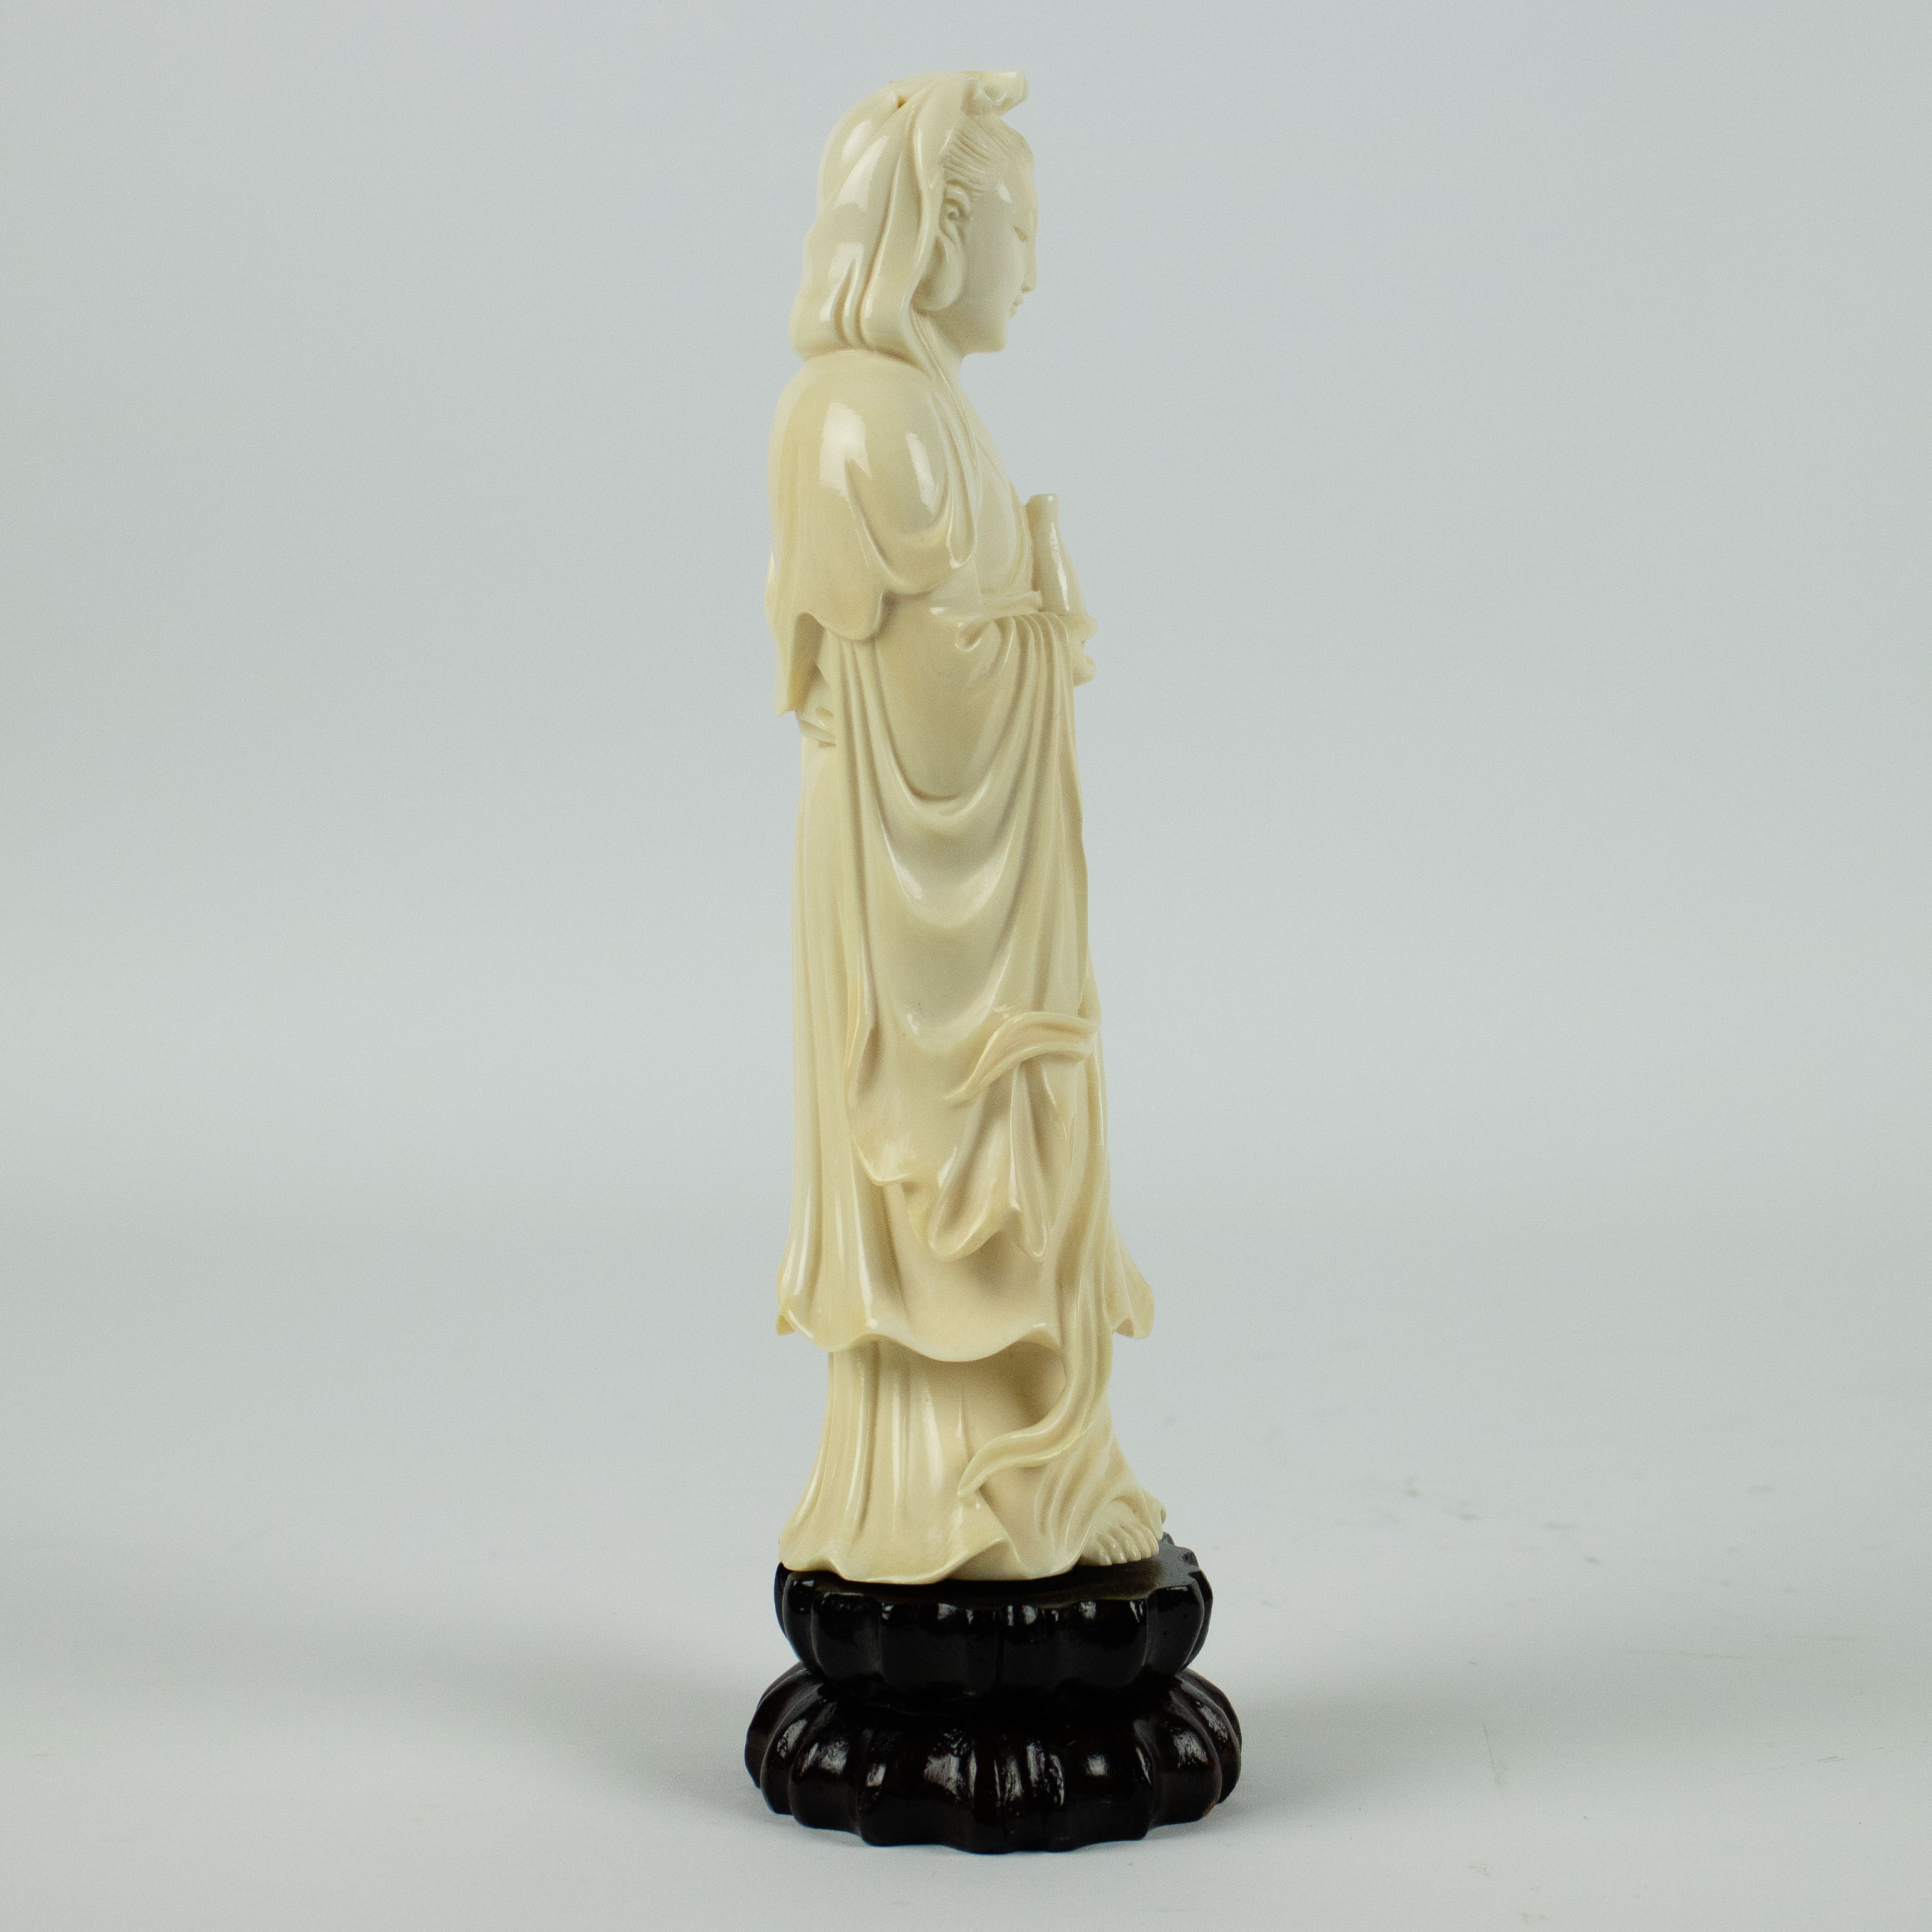 Chinese carved elephant ivory figure of Guanyin - Image 4 of 4